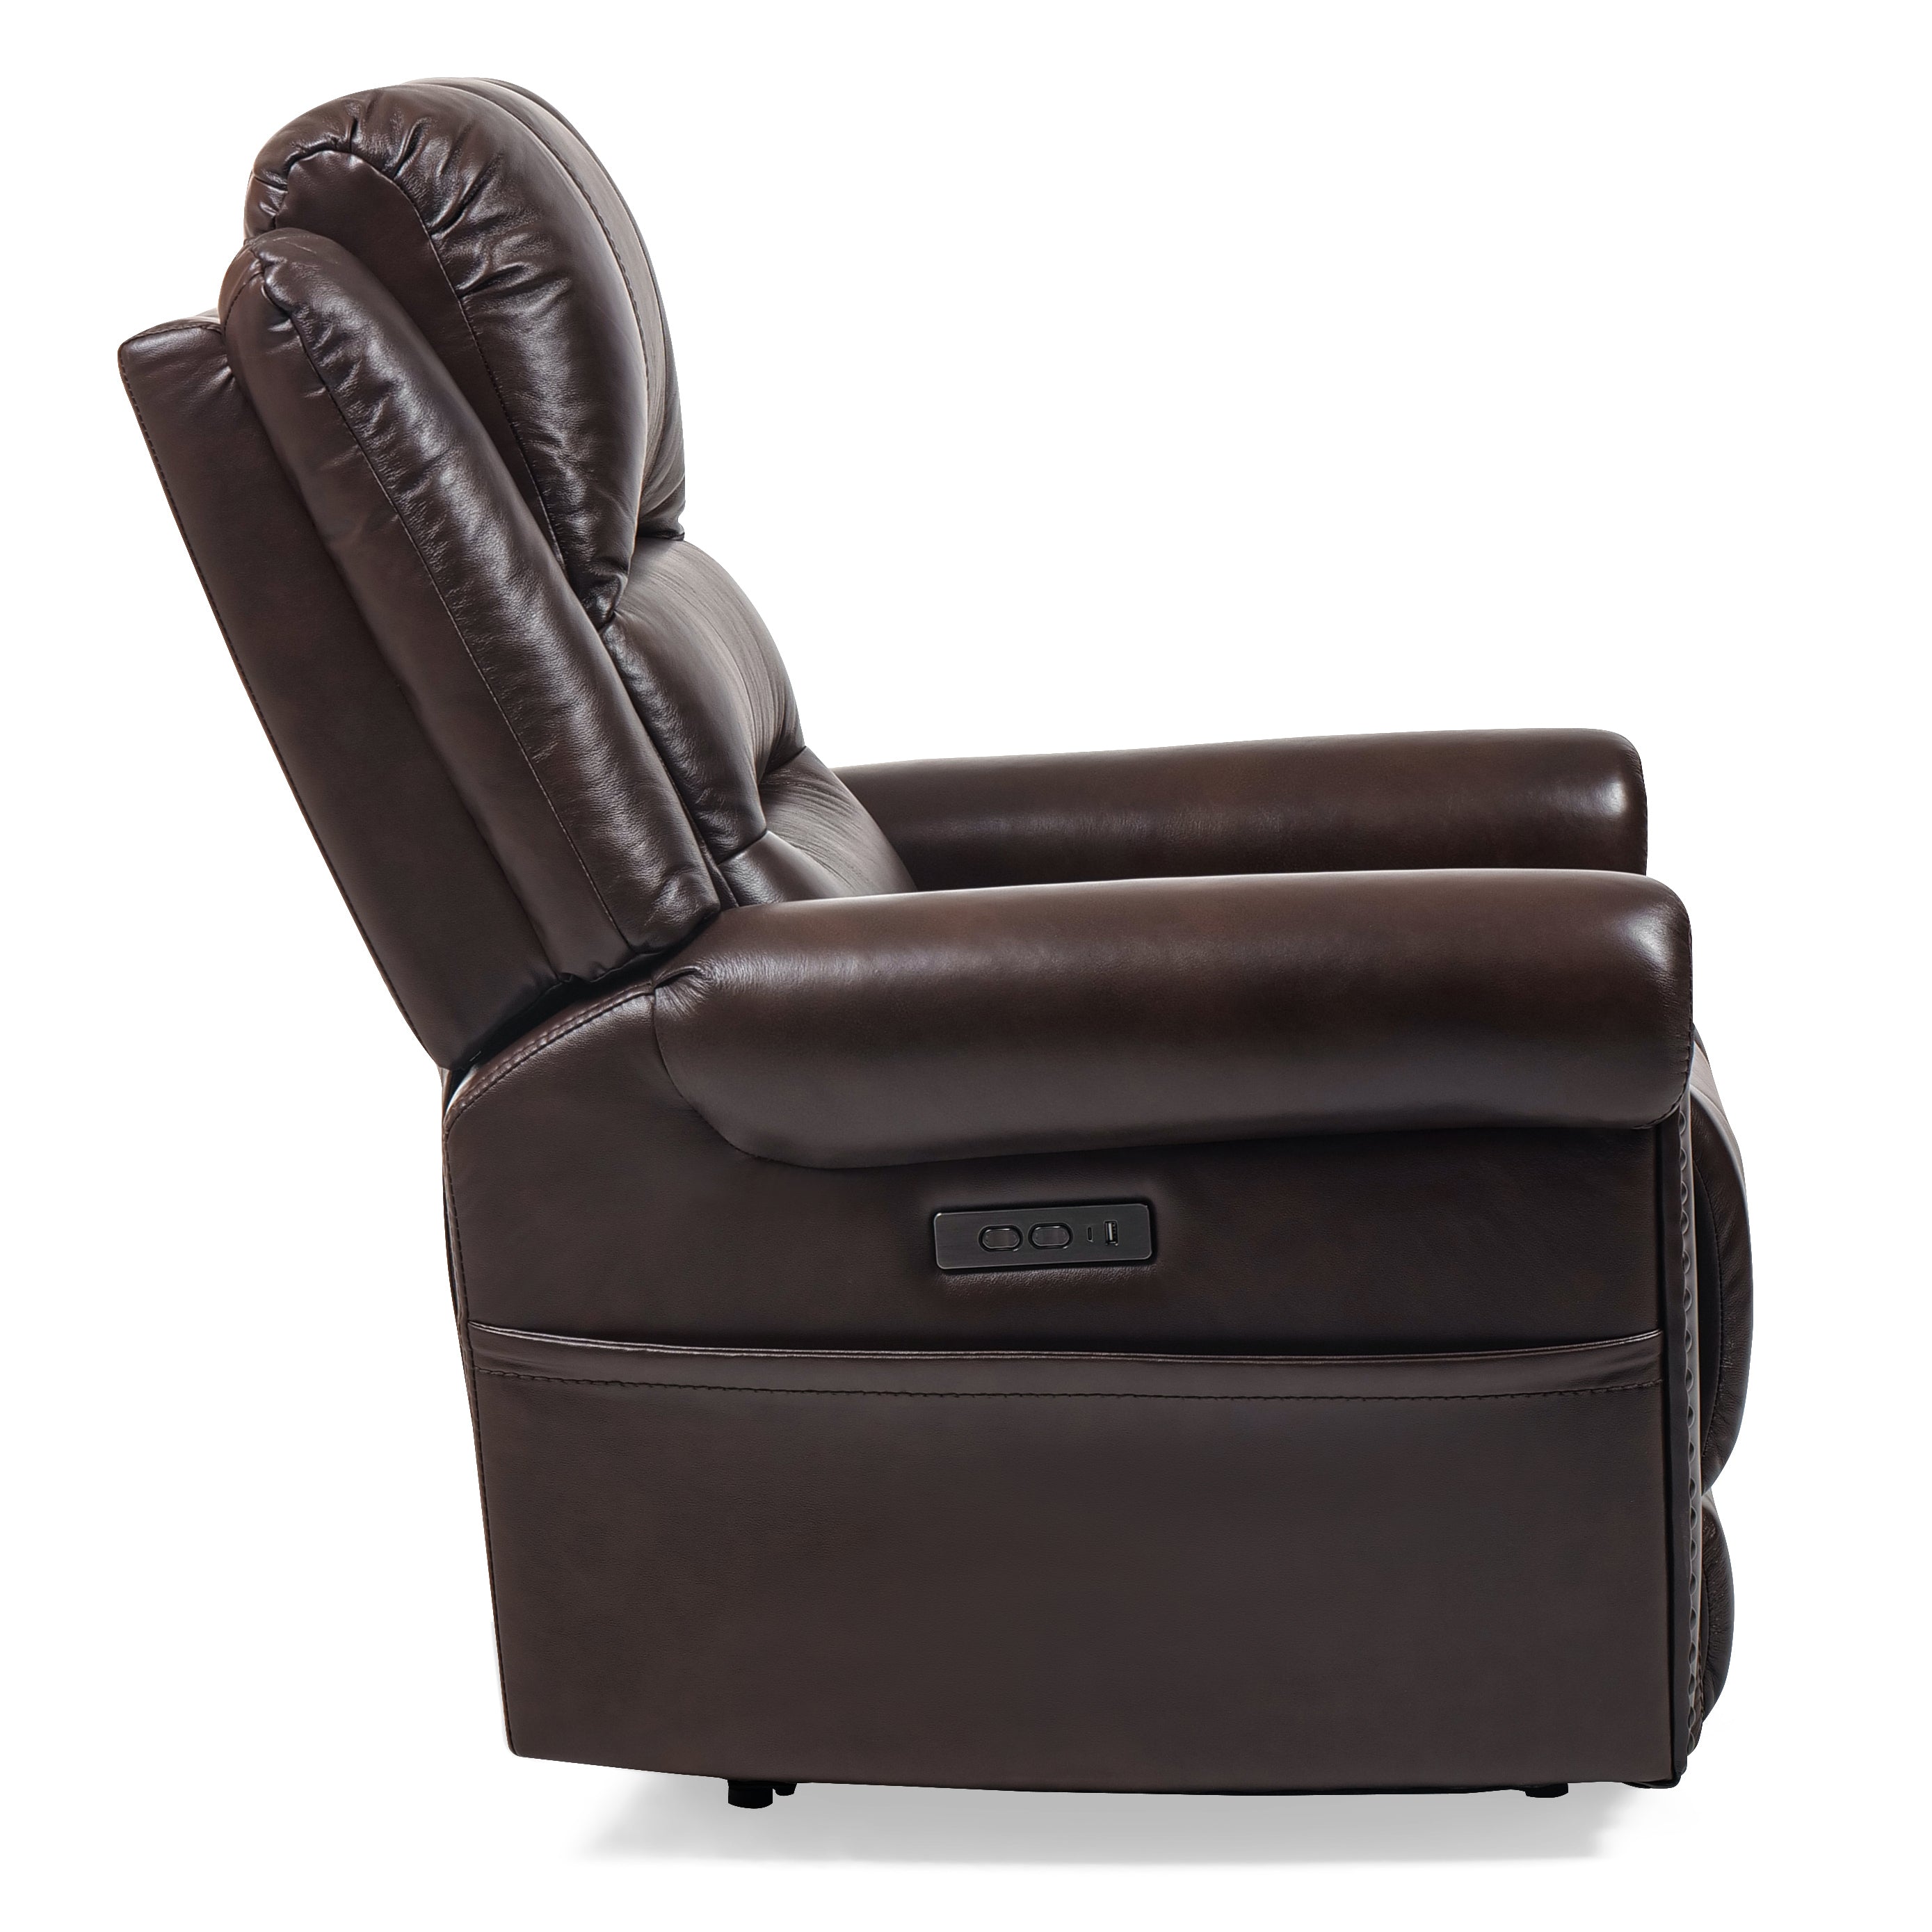 ComHoma Double Electrical Recliner